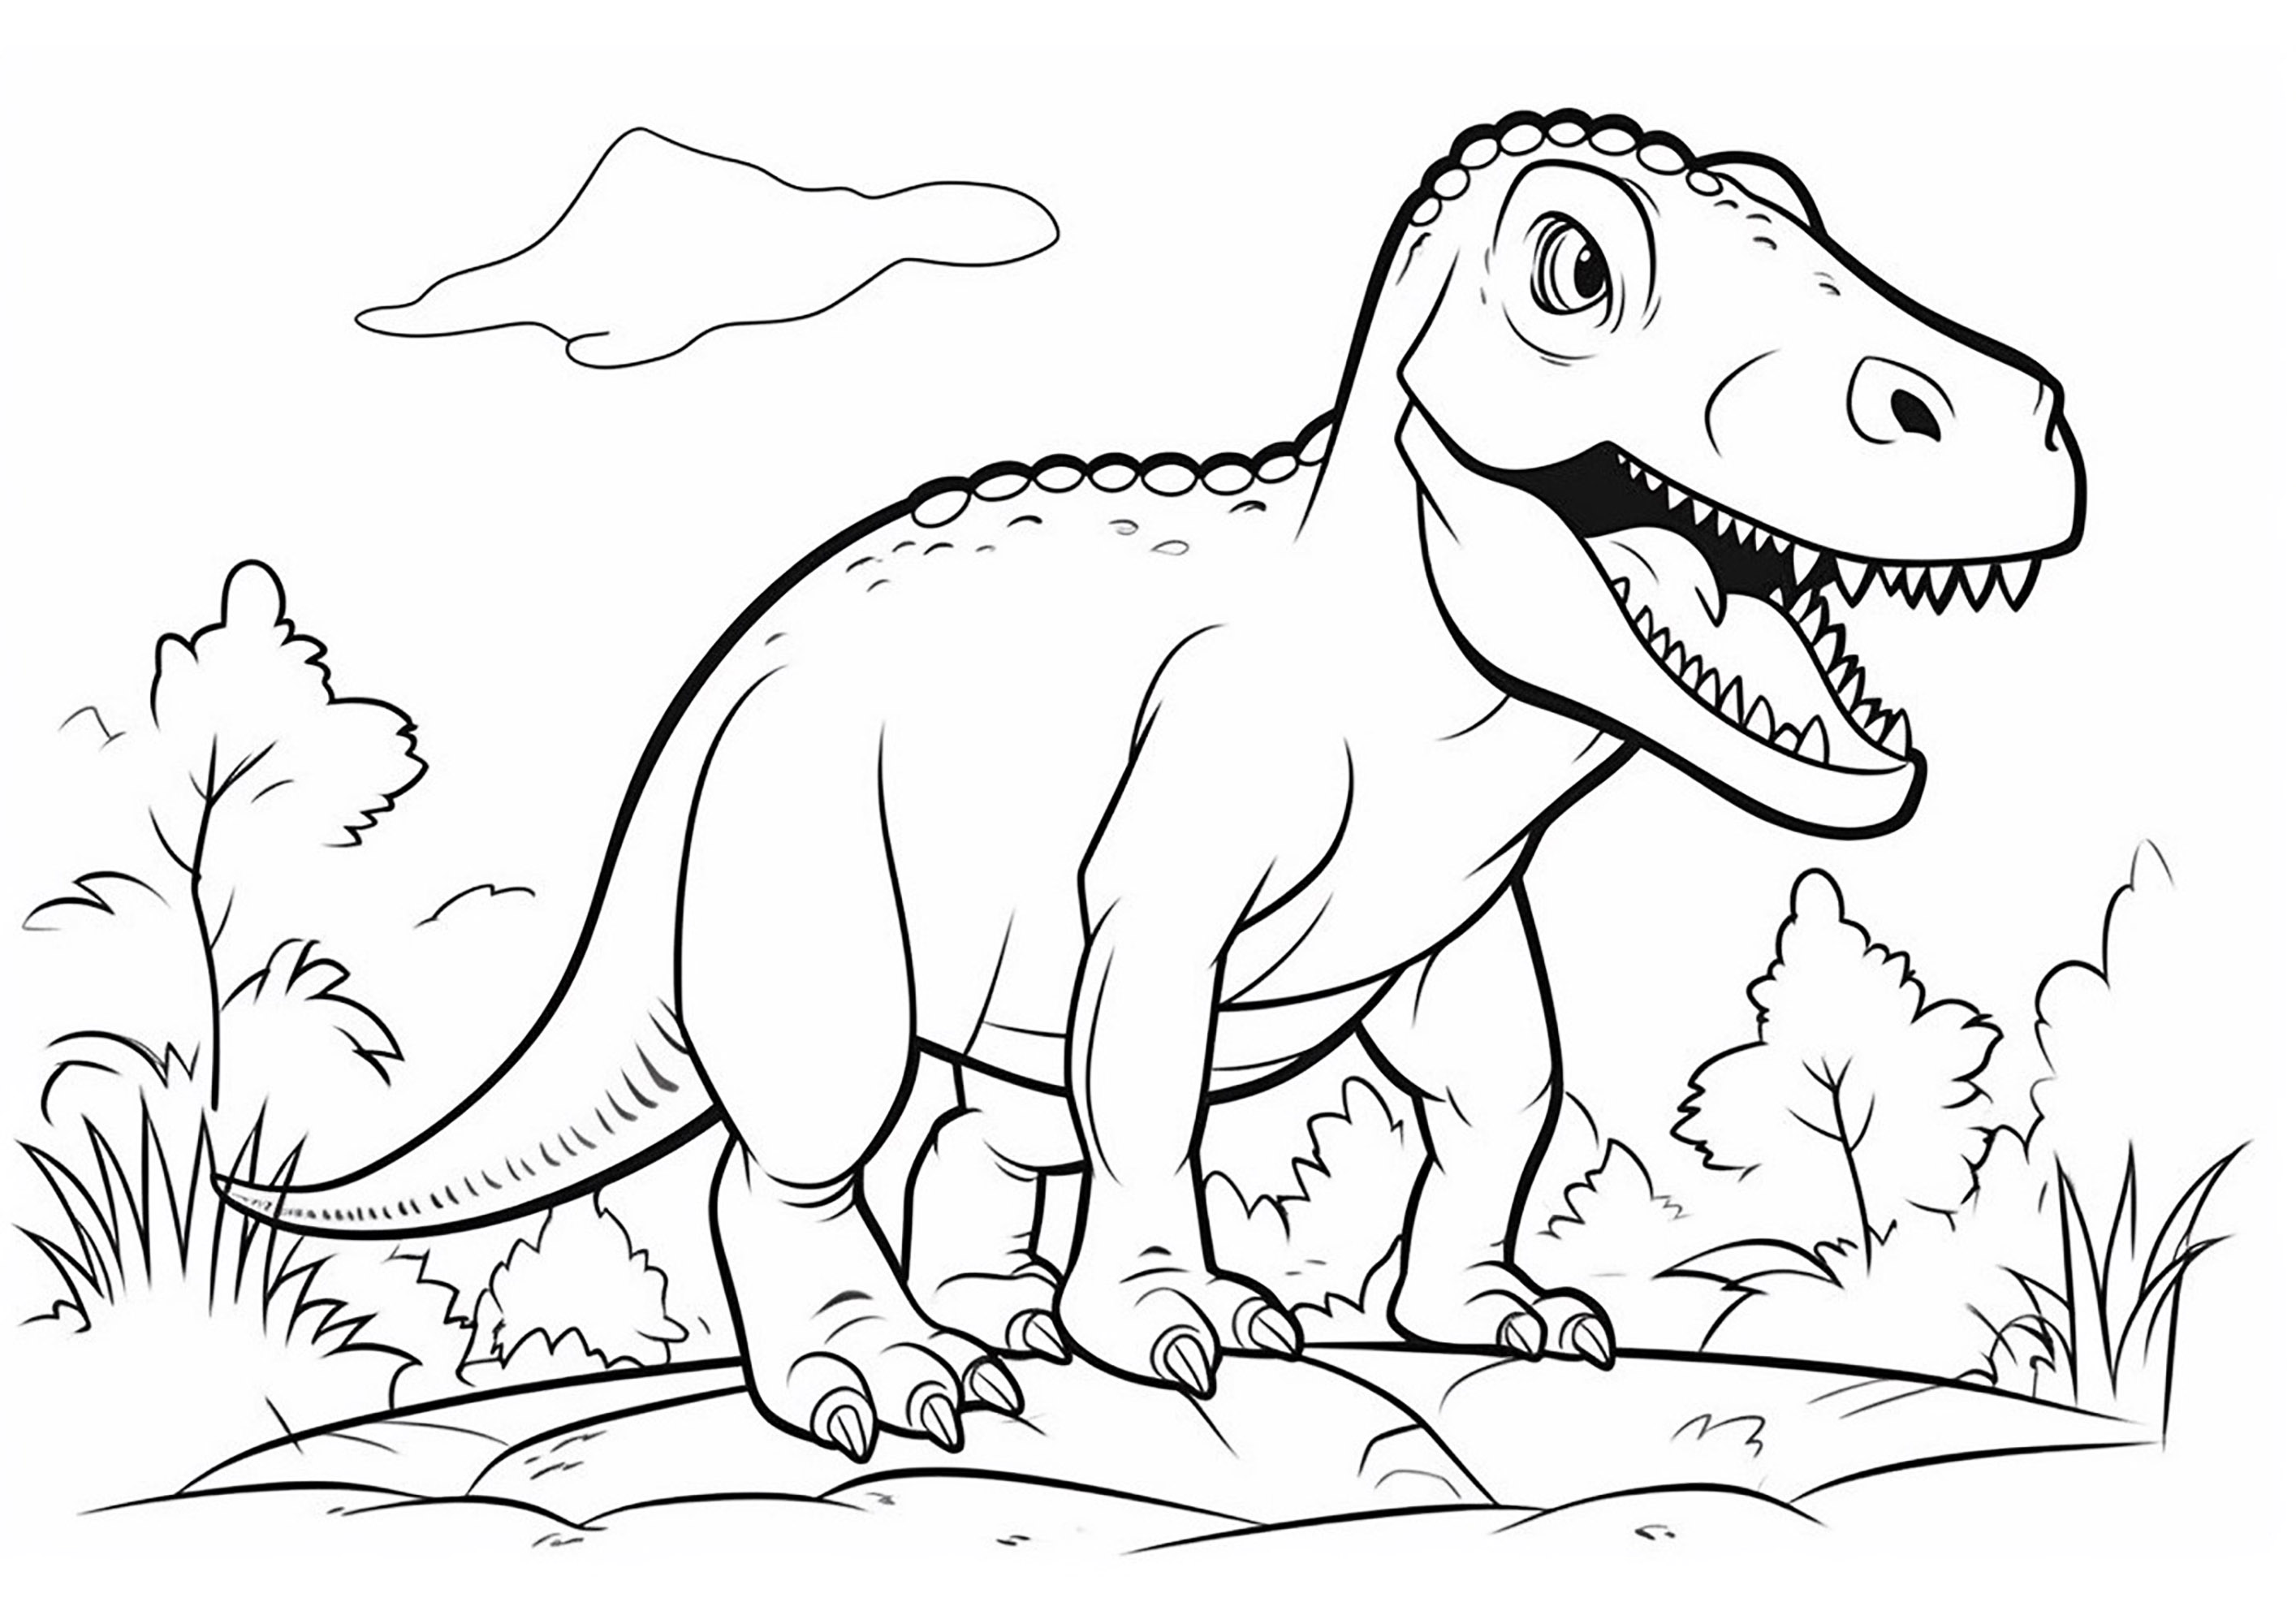 Simple Tyrannosaurus Rex. Coloring page of a Tyrannosaurus Rex, with simple background